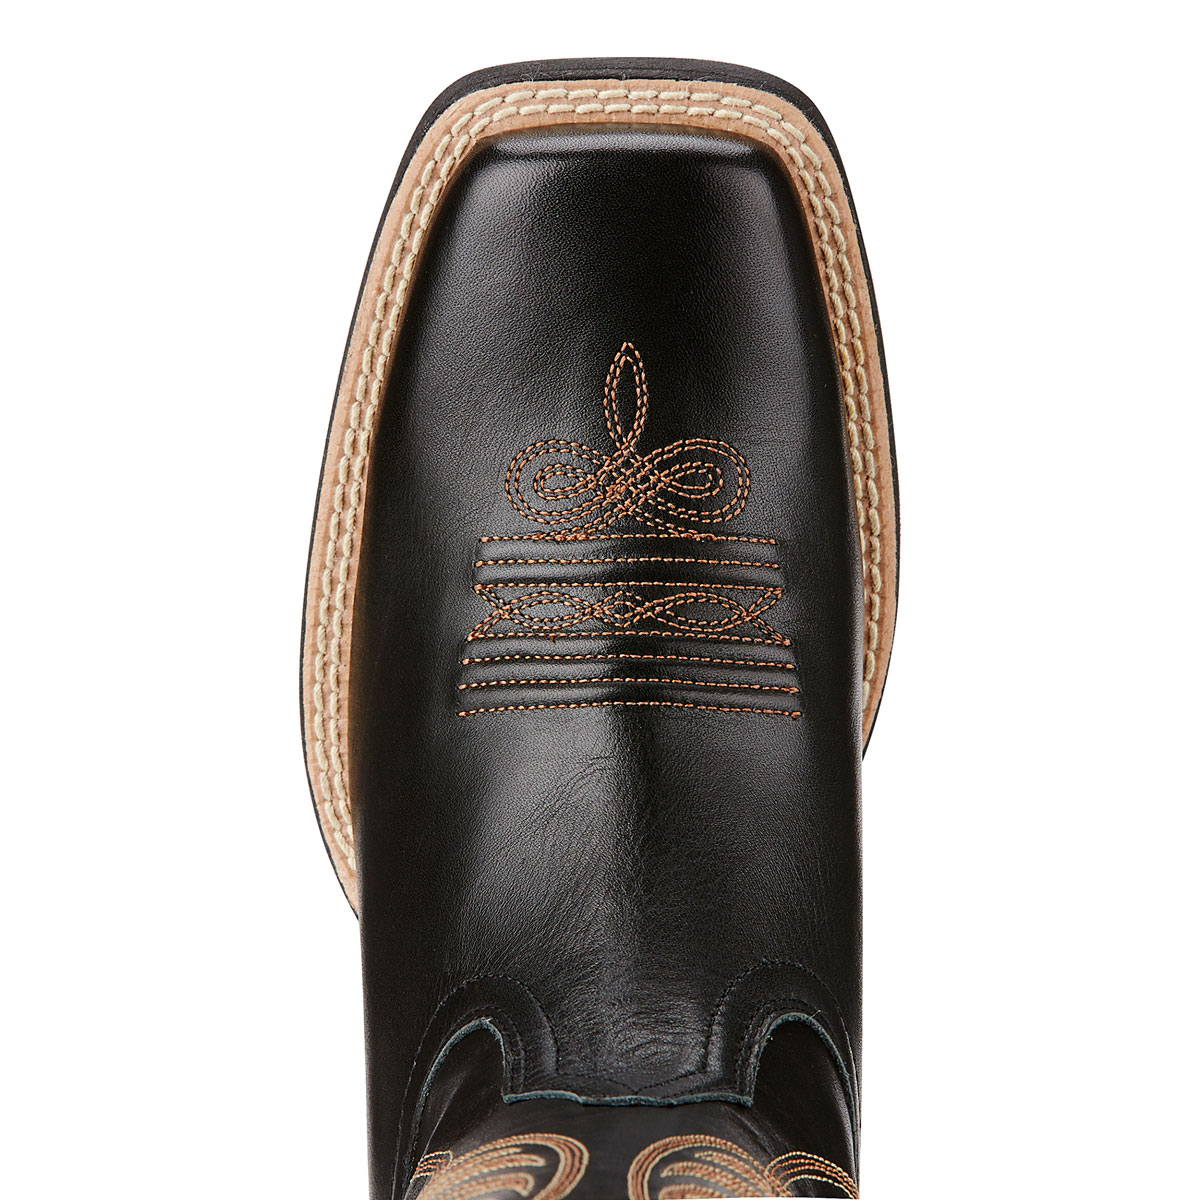 ariat women's round up wide square toe